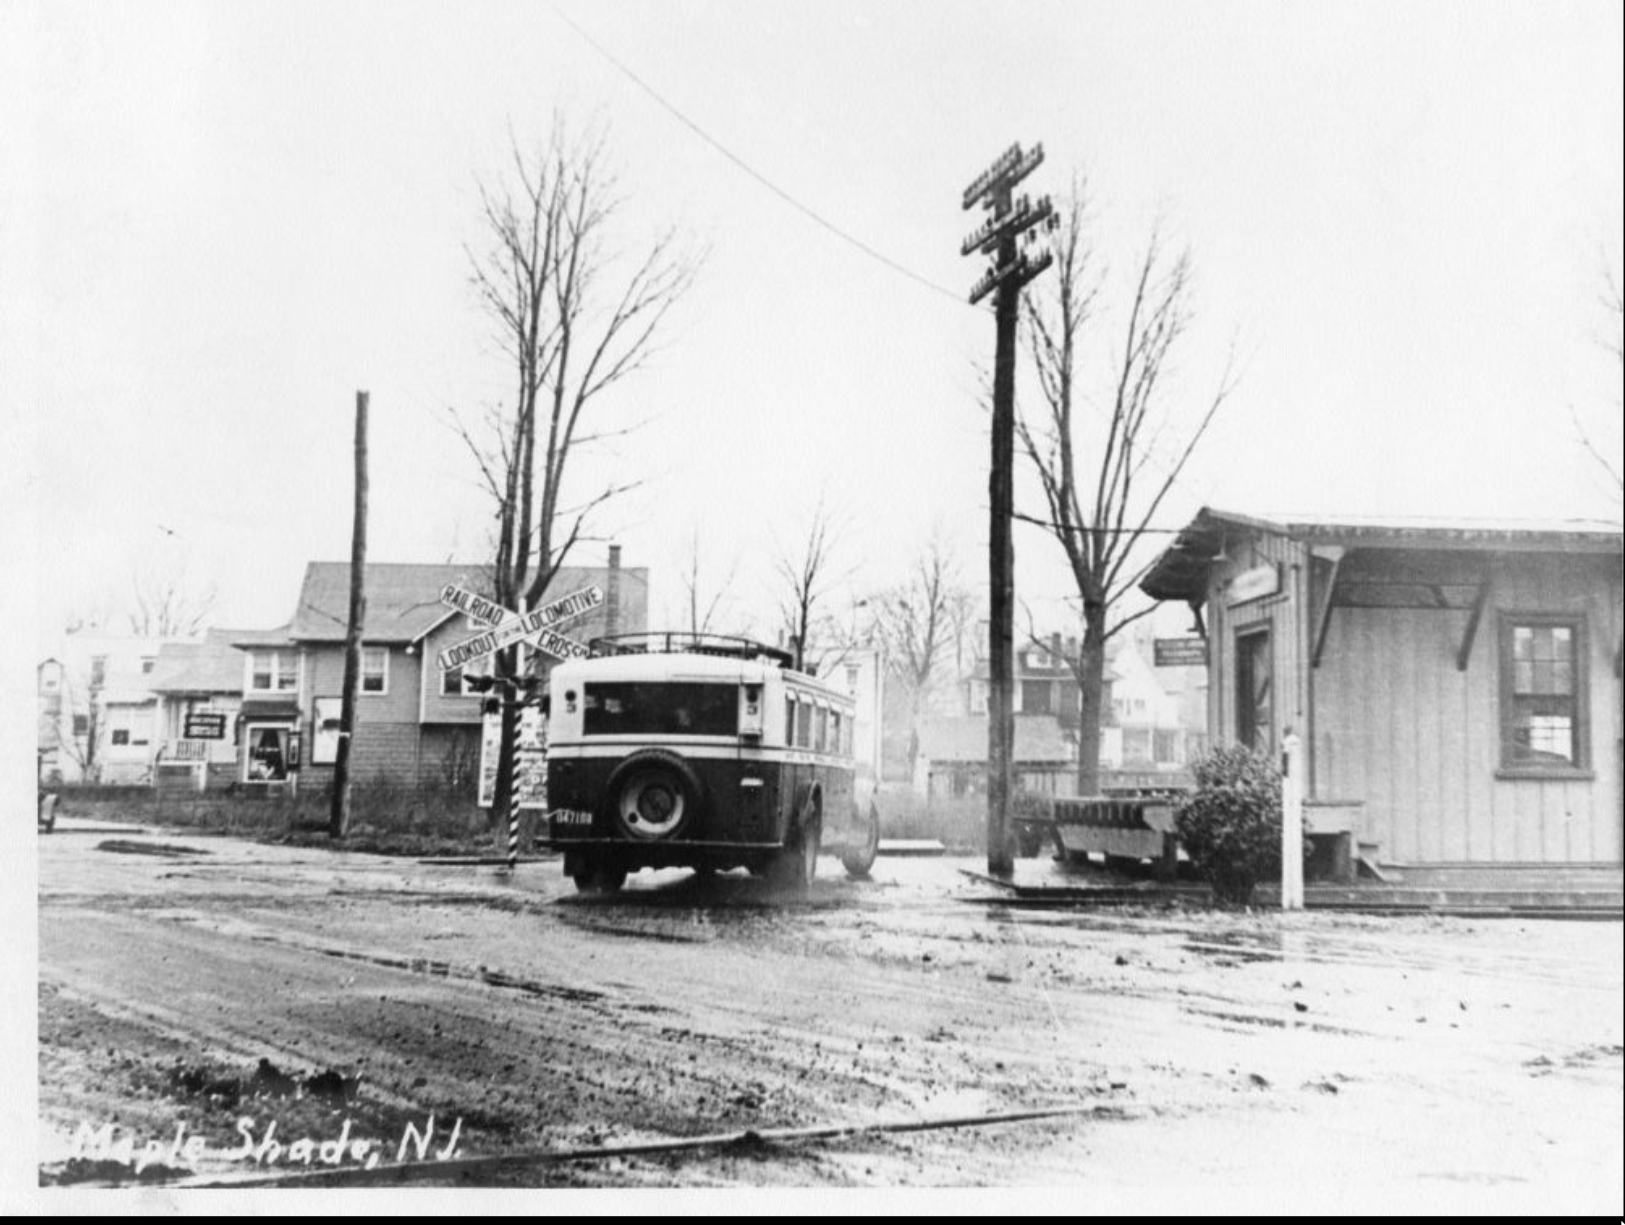 Maple Shade - Railroad station - 1950s maybe